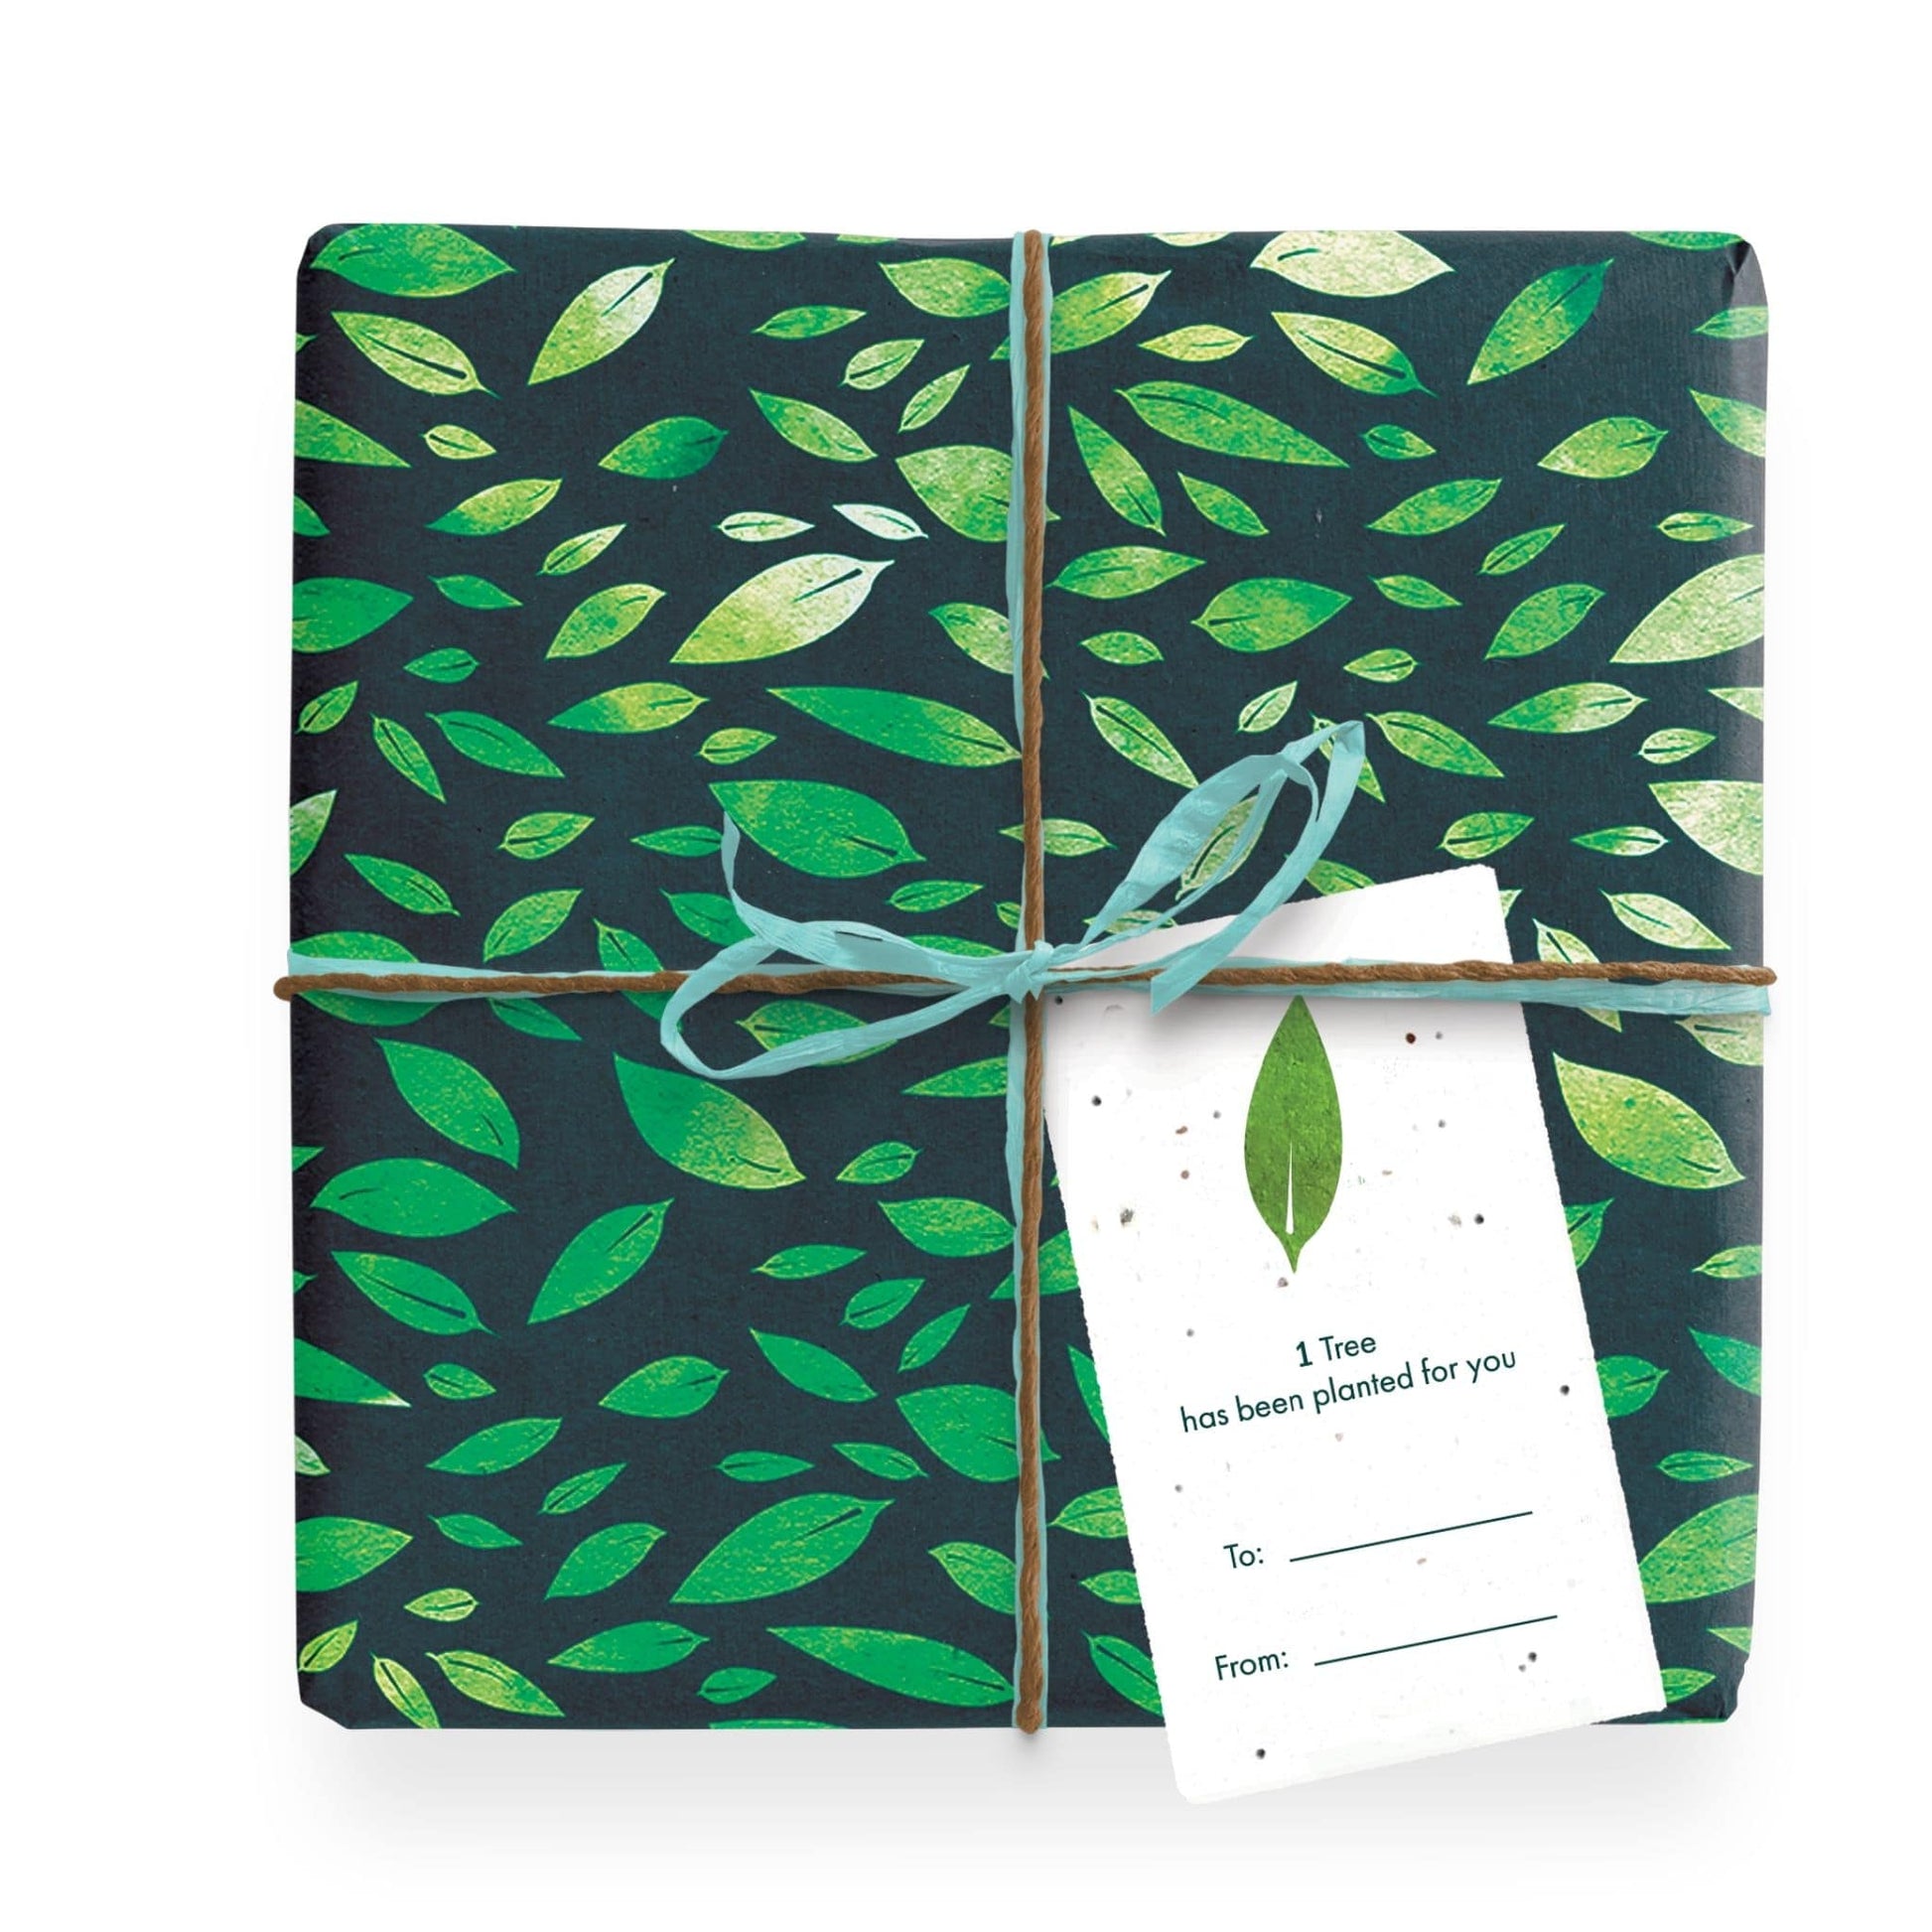 1 Tree Cards Wrapping Paper Pack - green leaves gift